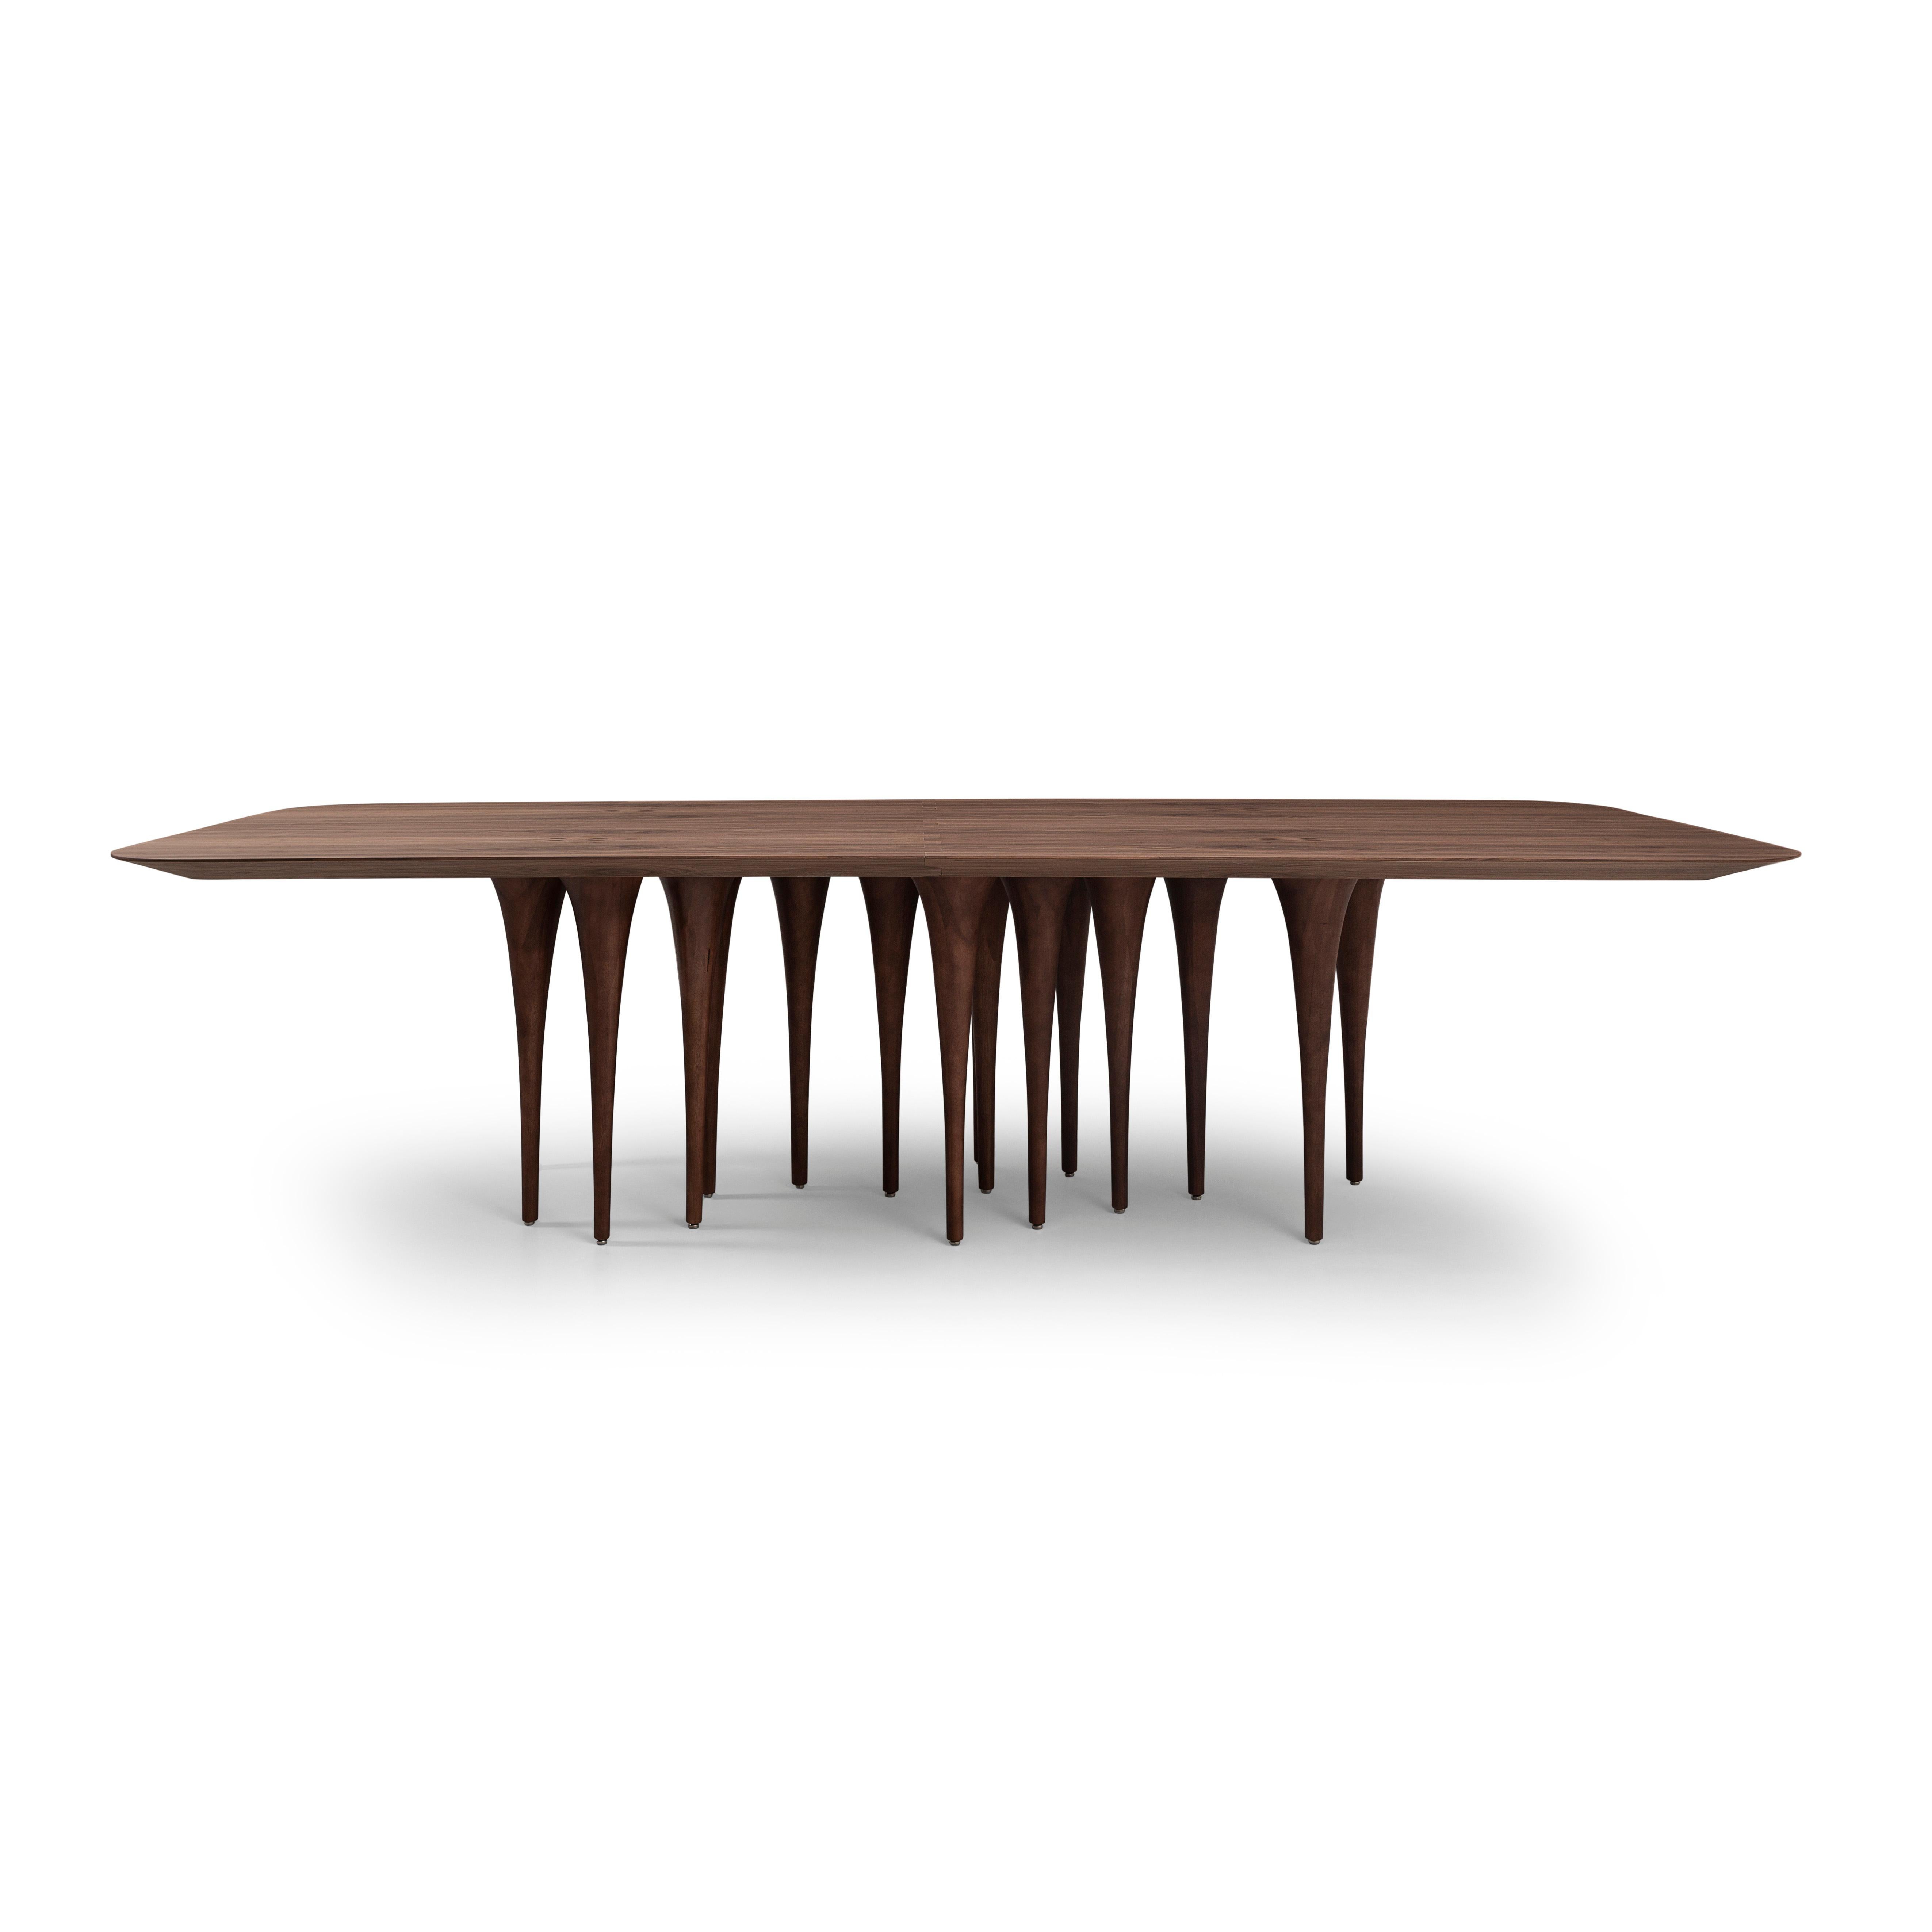 The Uultis team has created this rectangular Pin table in a walnut wood finish with twelve legs causing a surprising impact at first sight. It has a very singular and original structure resembling the corridors of Gothic castles, but at the same